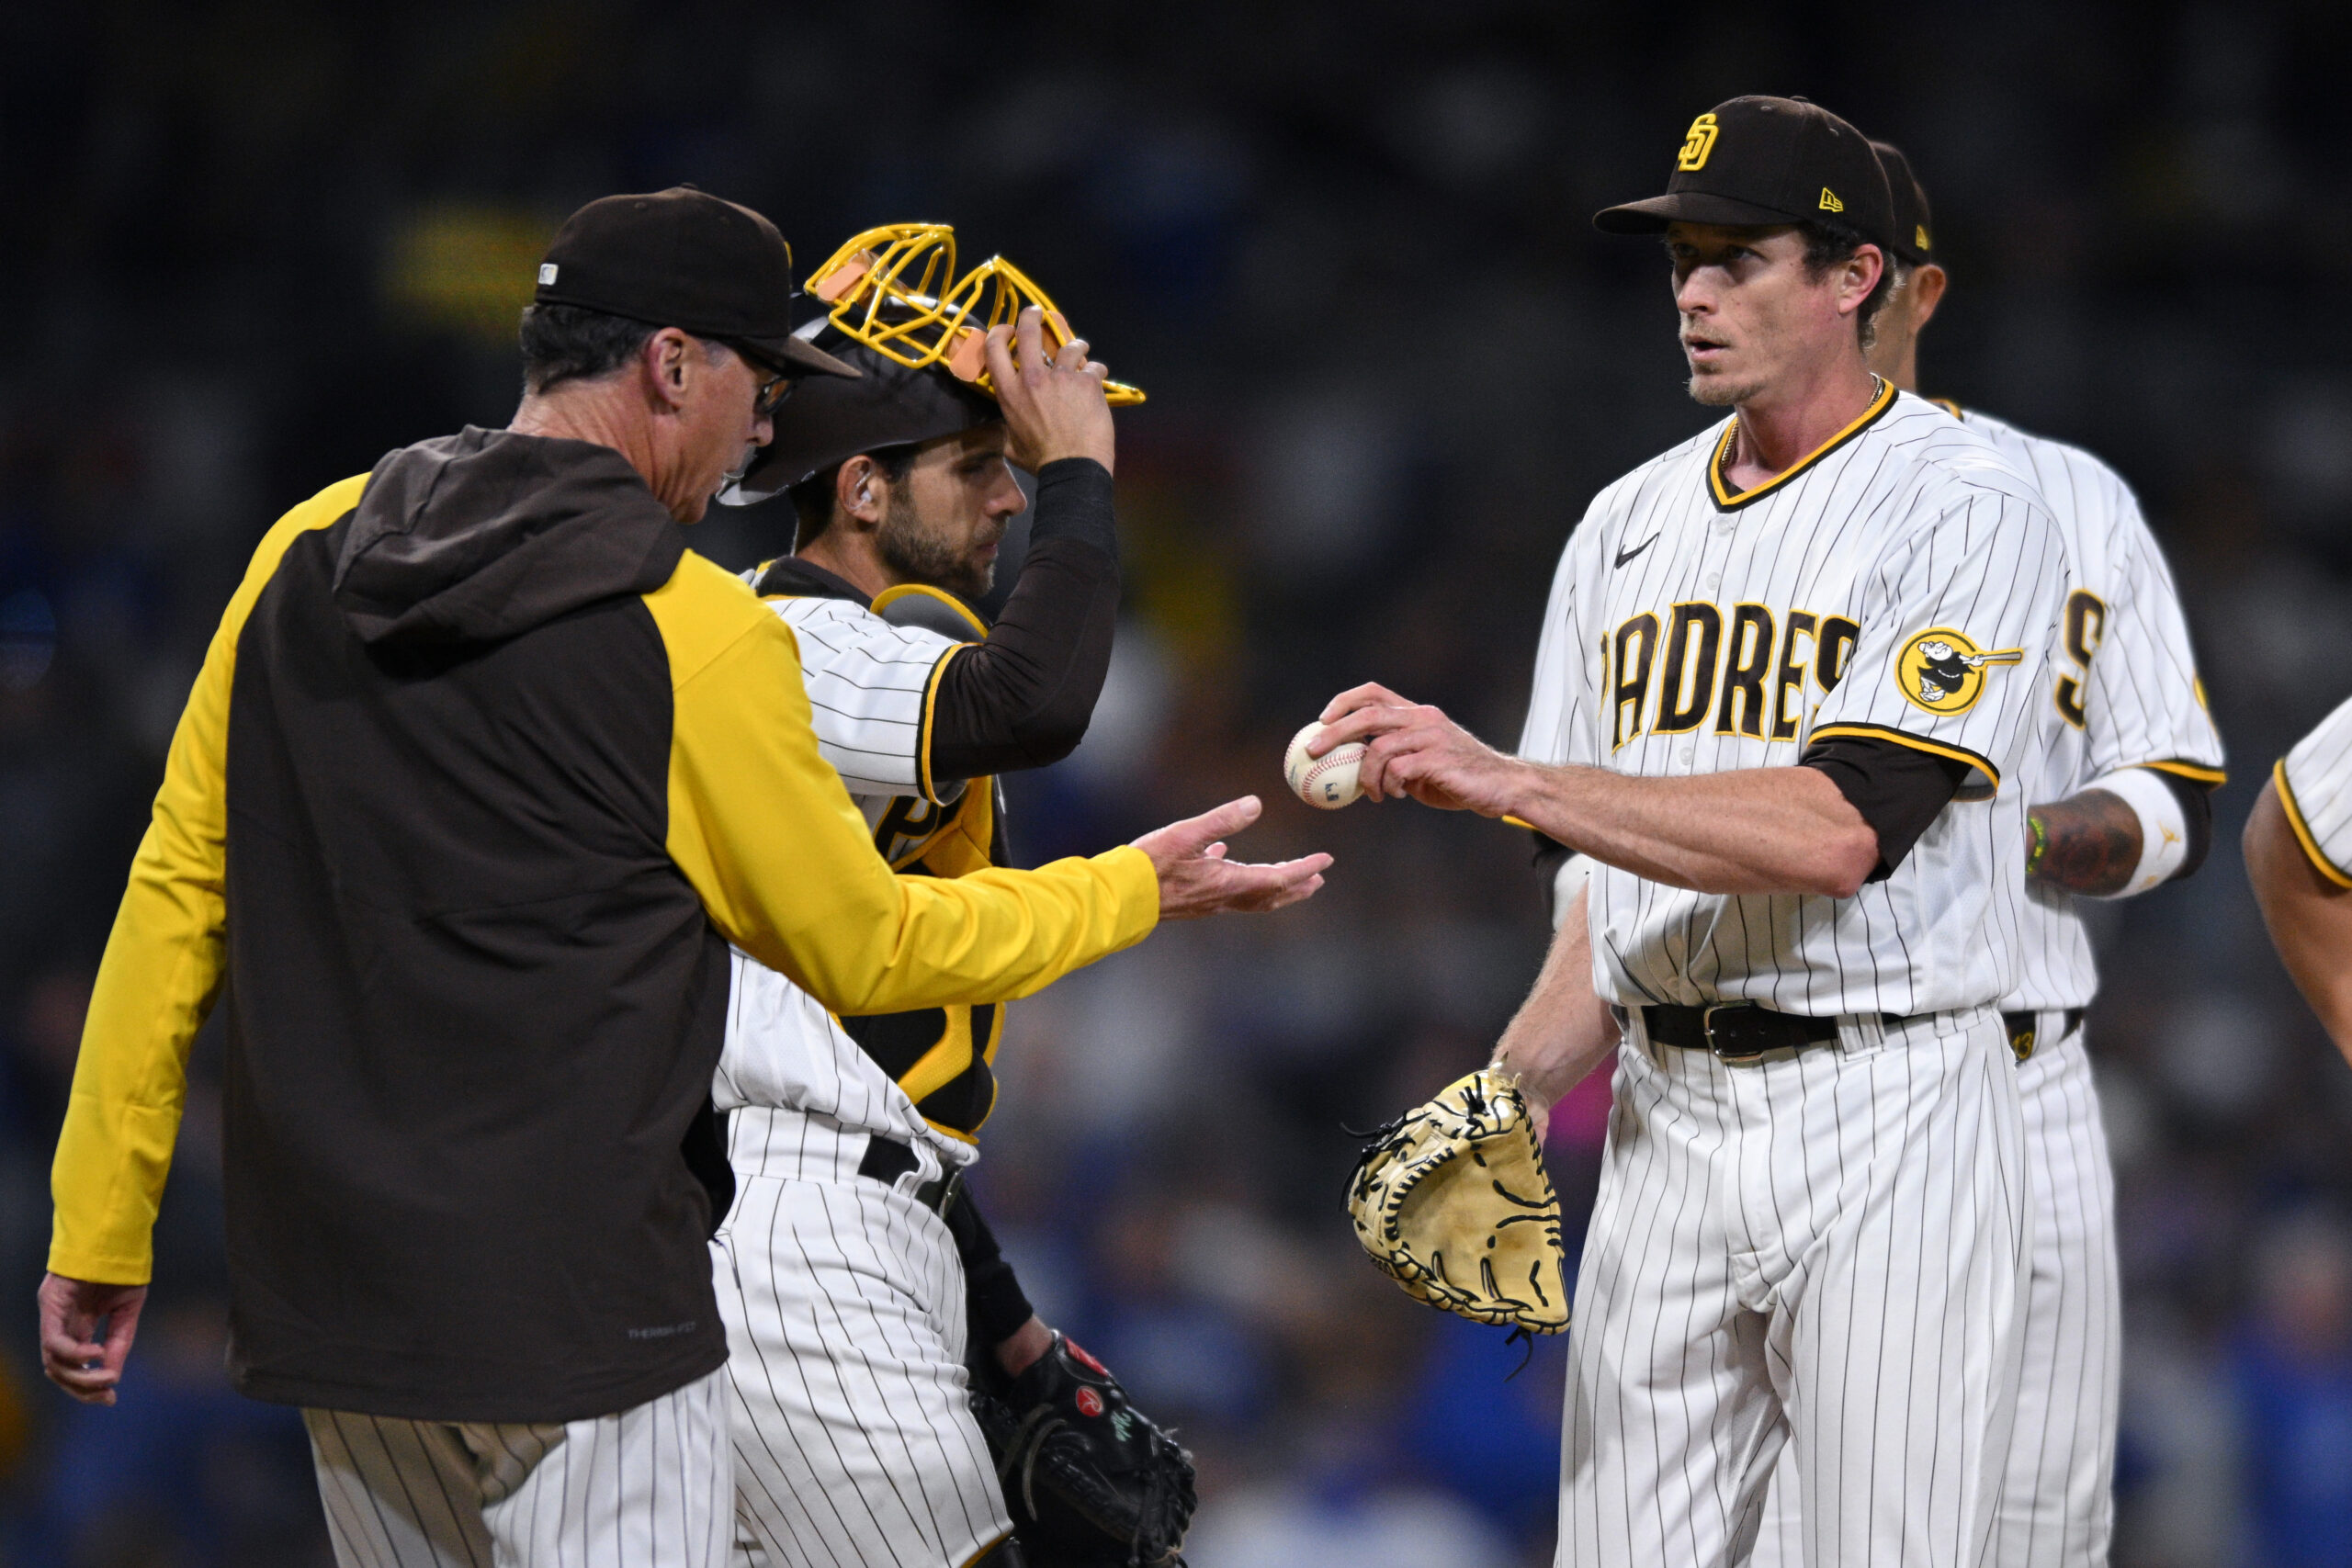 Padres bullpen seeks to be just as good, not as bad - The San